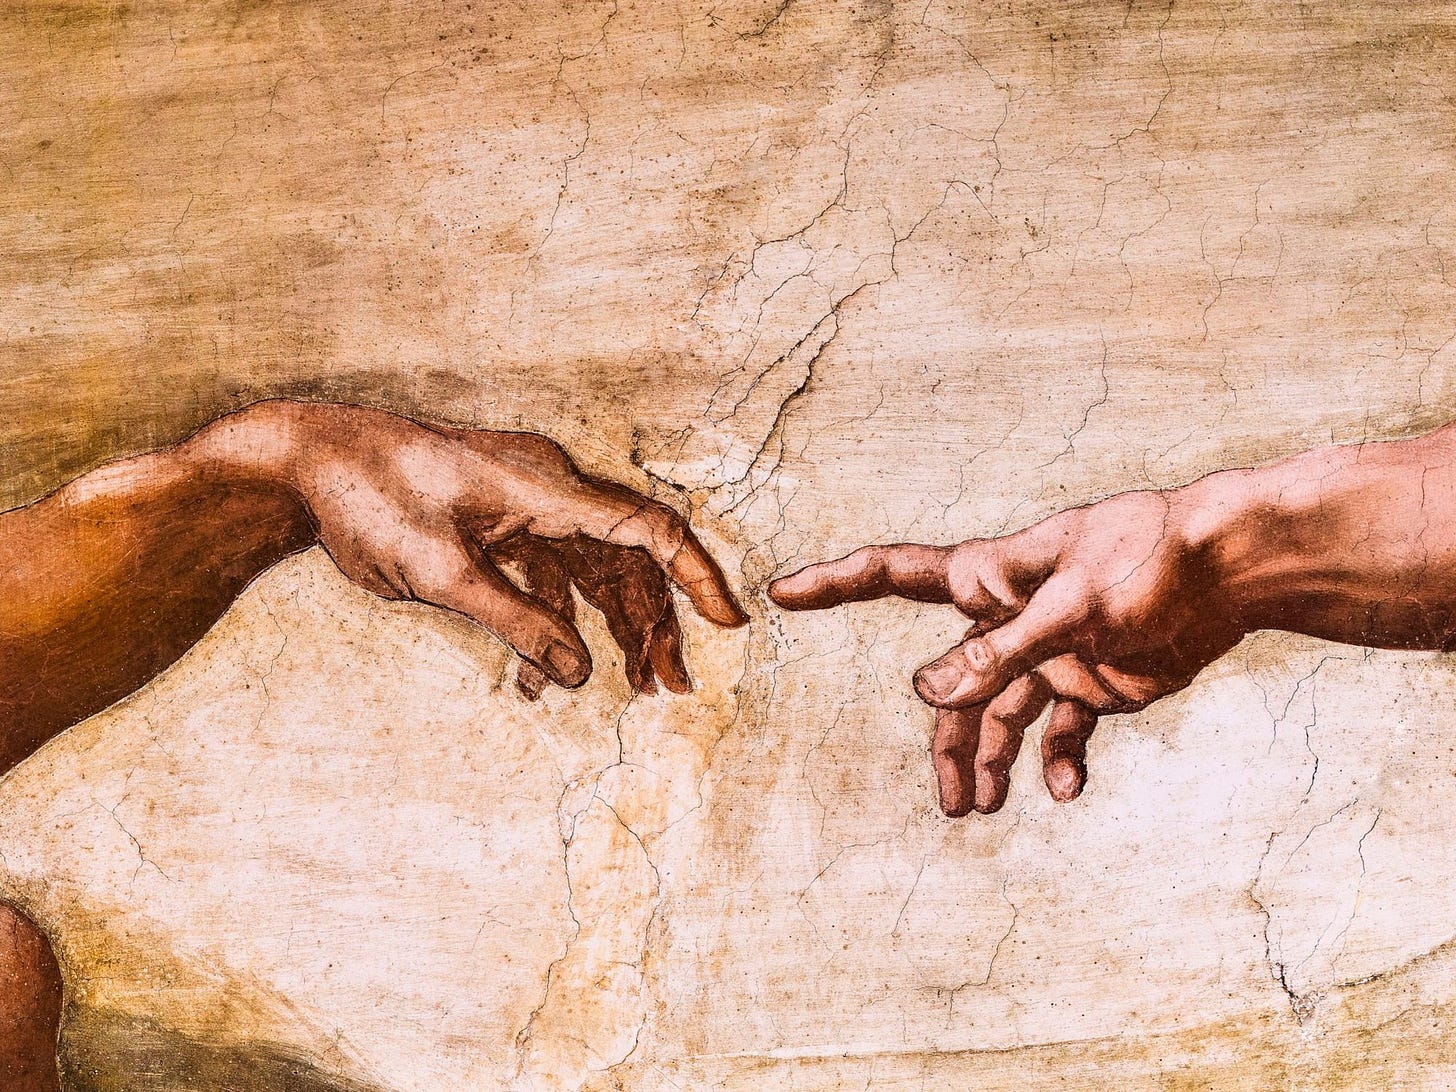 Stuart Dee / Getty Images: Close up of God and Adam's hands.